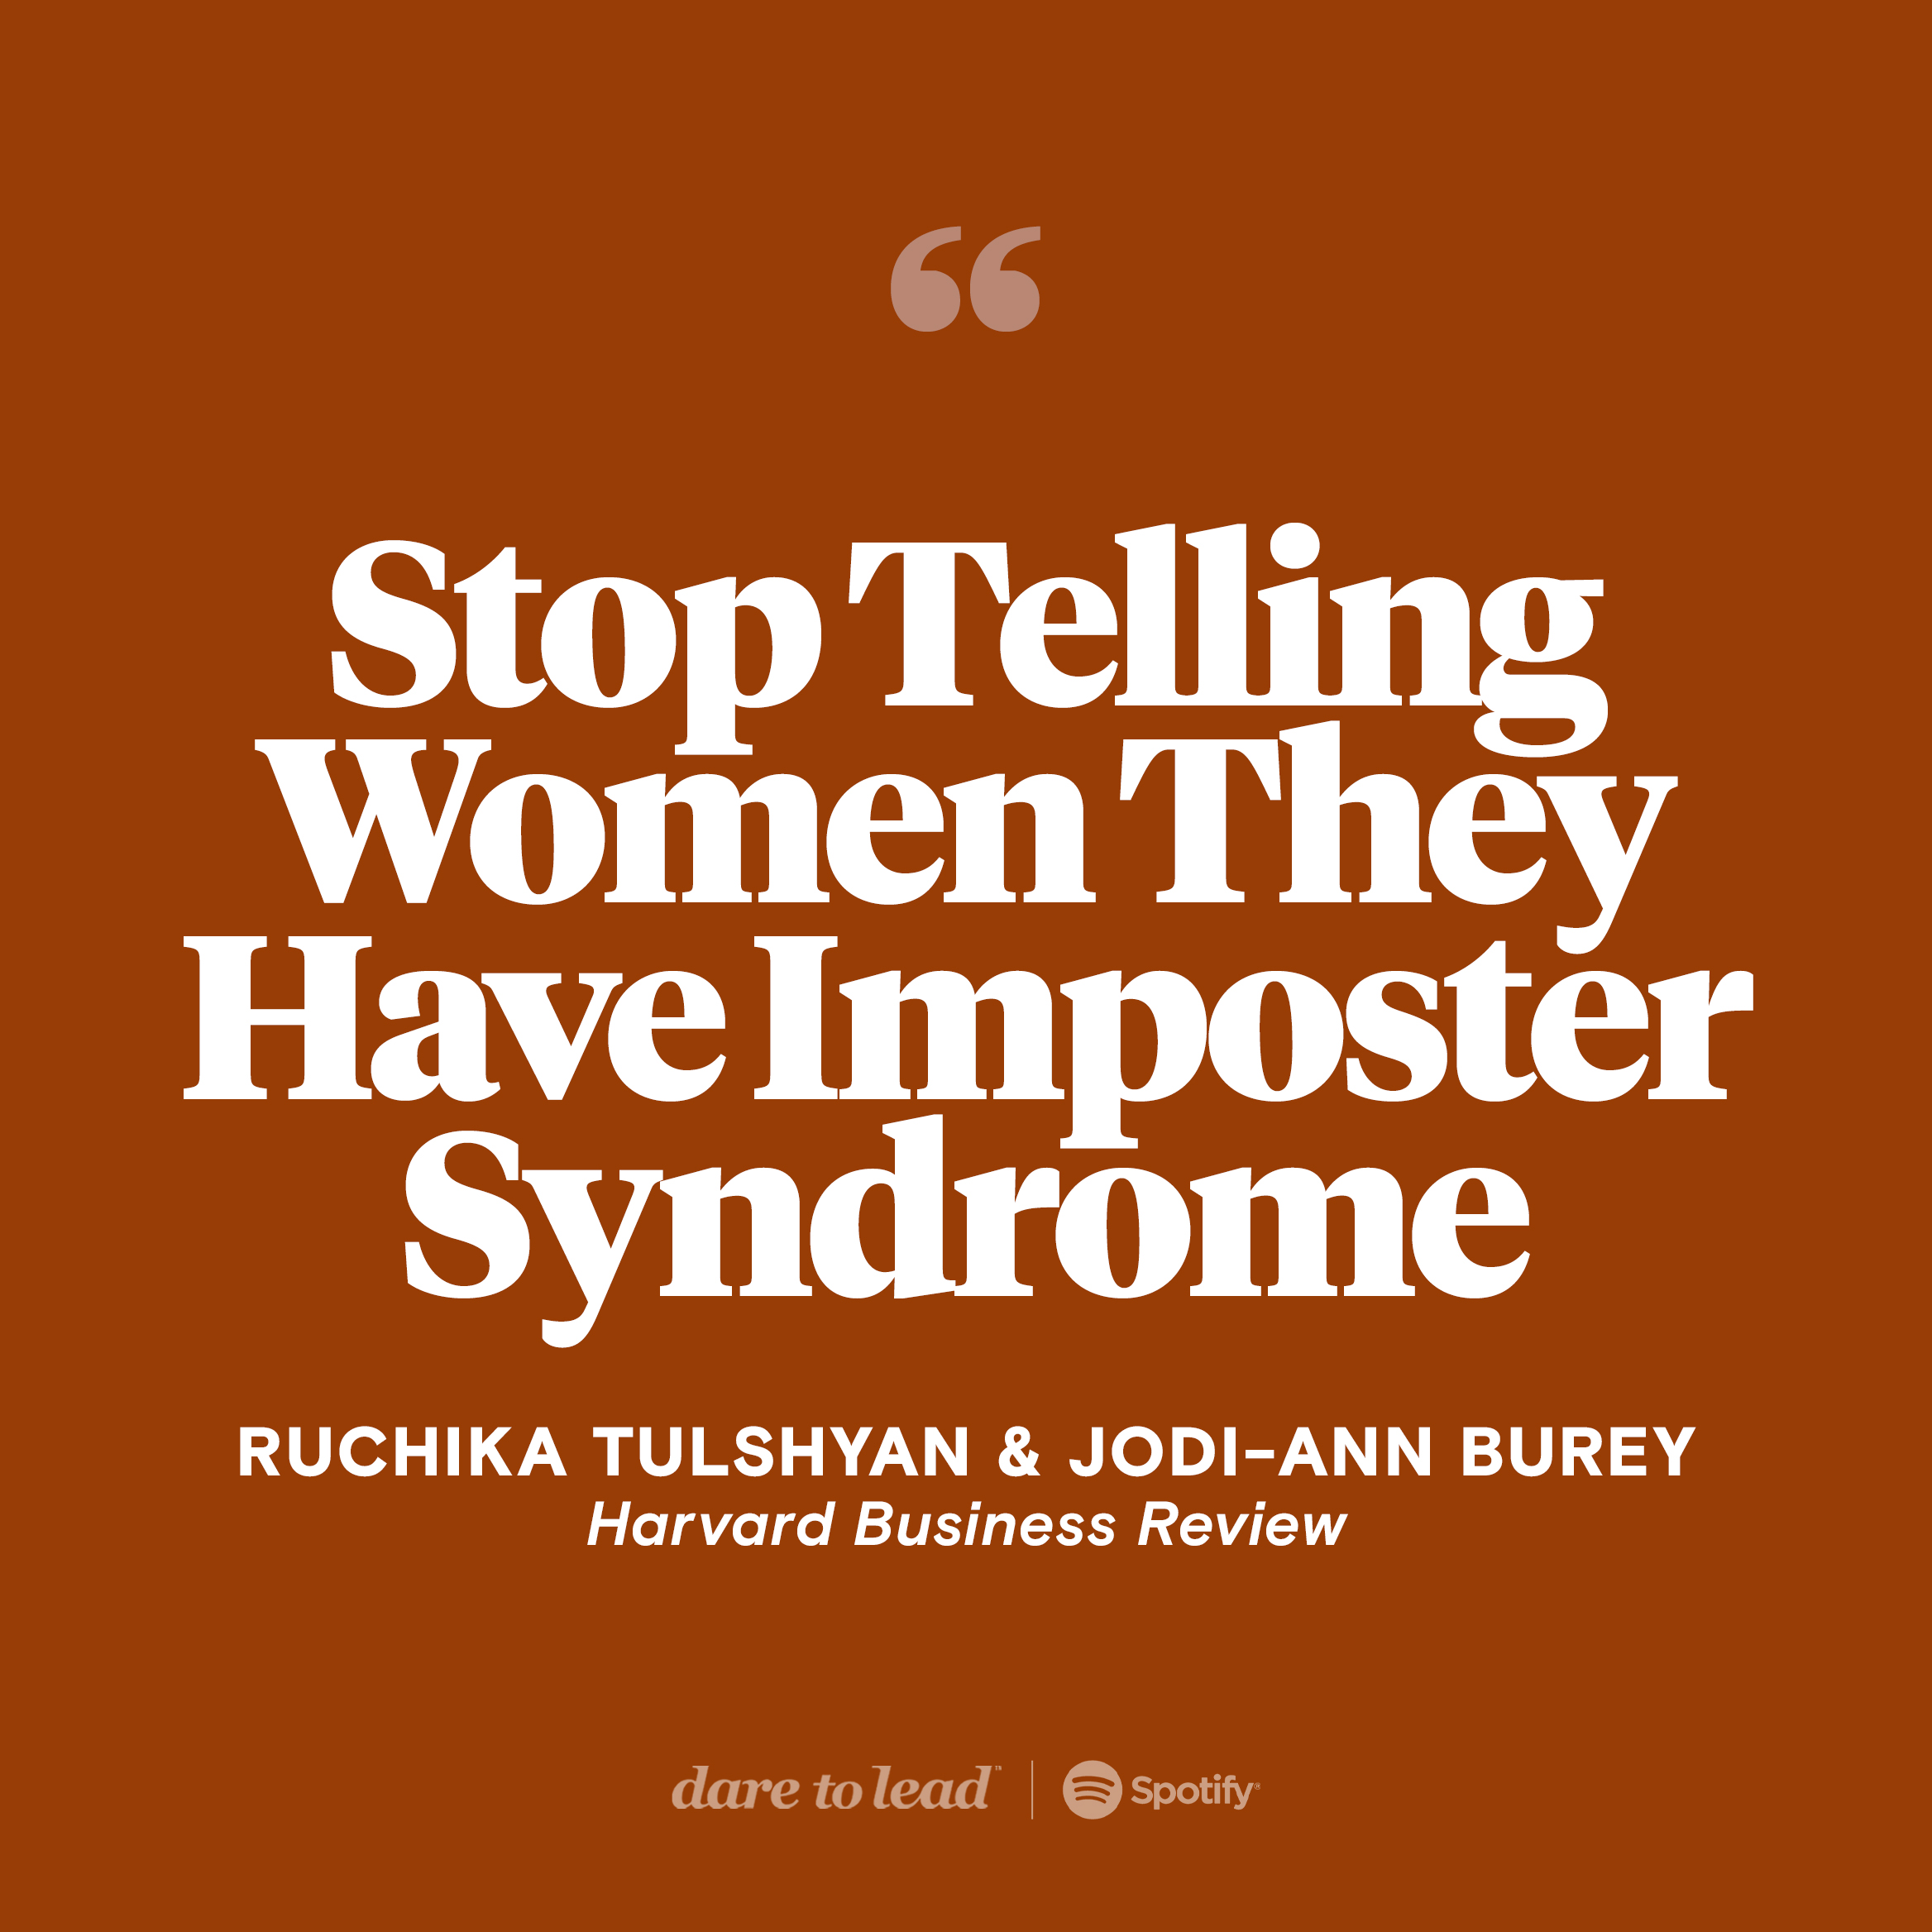 The headline of an article in the Harvard Business Review co-written by Ruchika Tulshyan and Jodi-Ann Burey: Stop Telling Women They Have Imposter Syndrome.